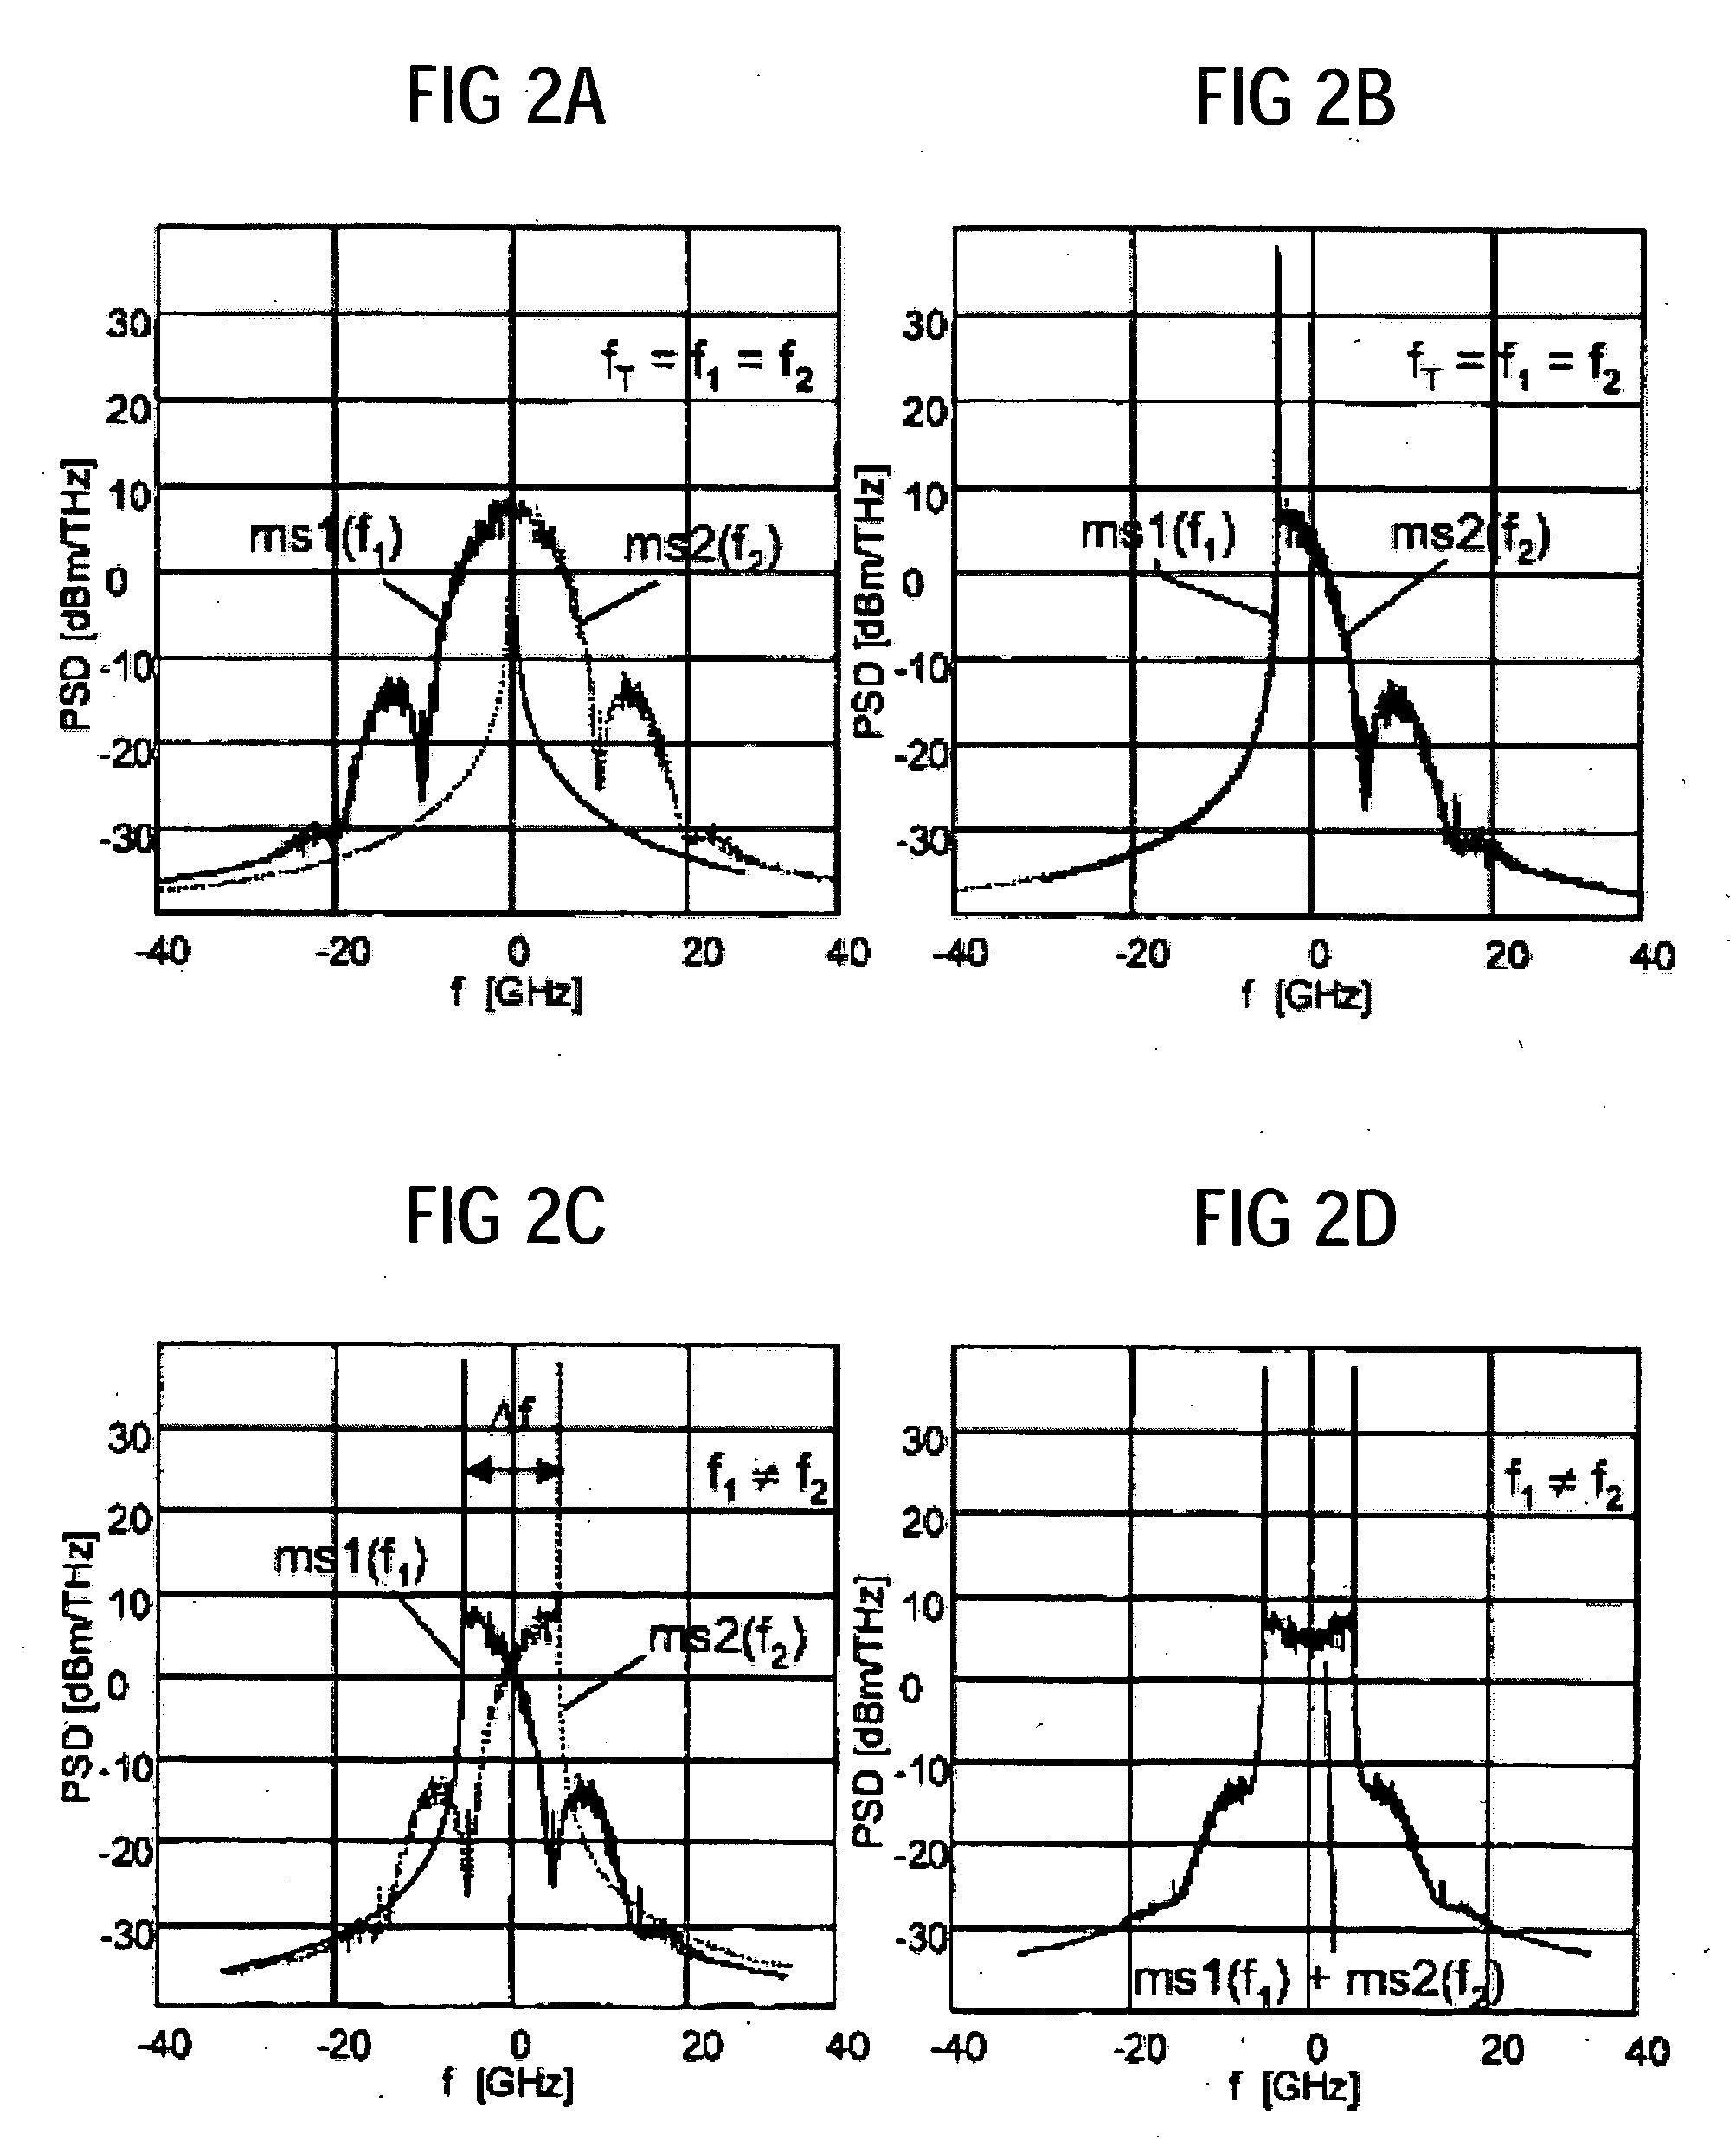 Method for transmitting at least one first and second data signal in polarization multiplex in an optical transmission system